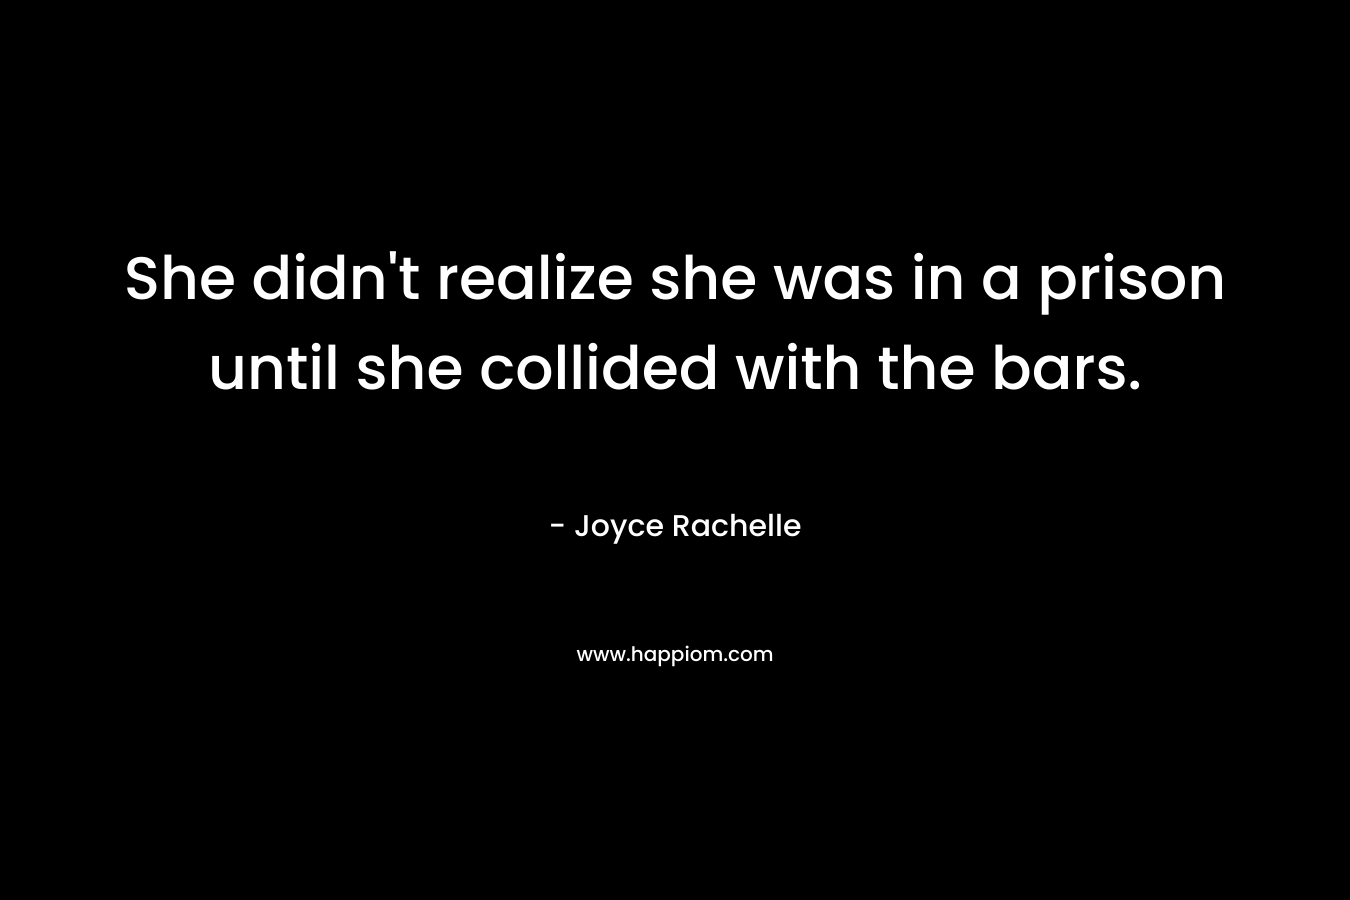 She didn’t realize she was in a prison until she collided with the bars. – Joyce Rachelle